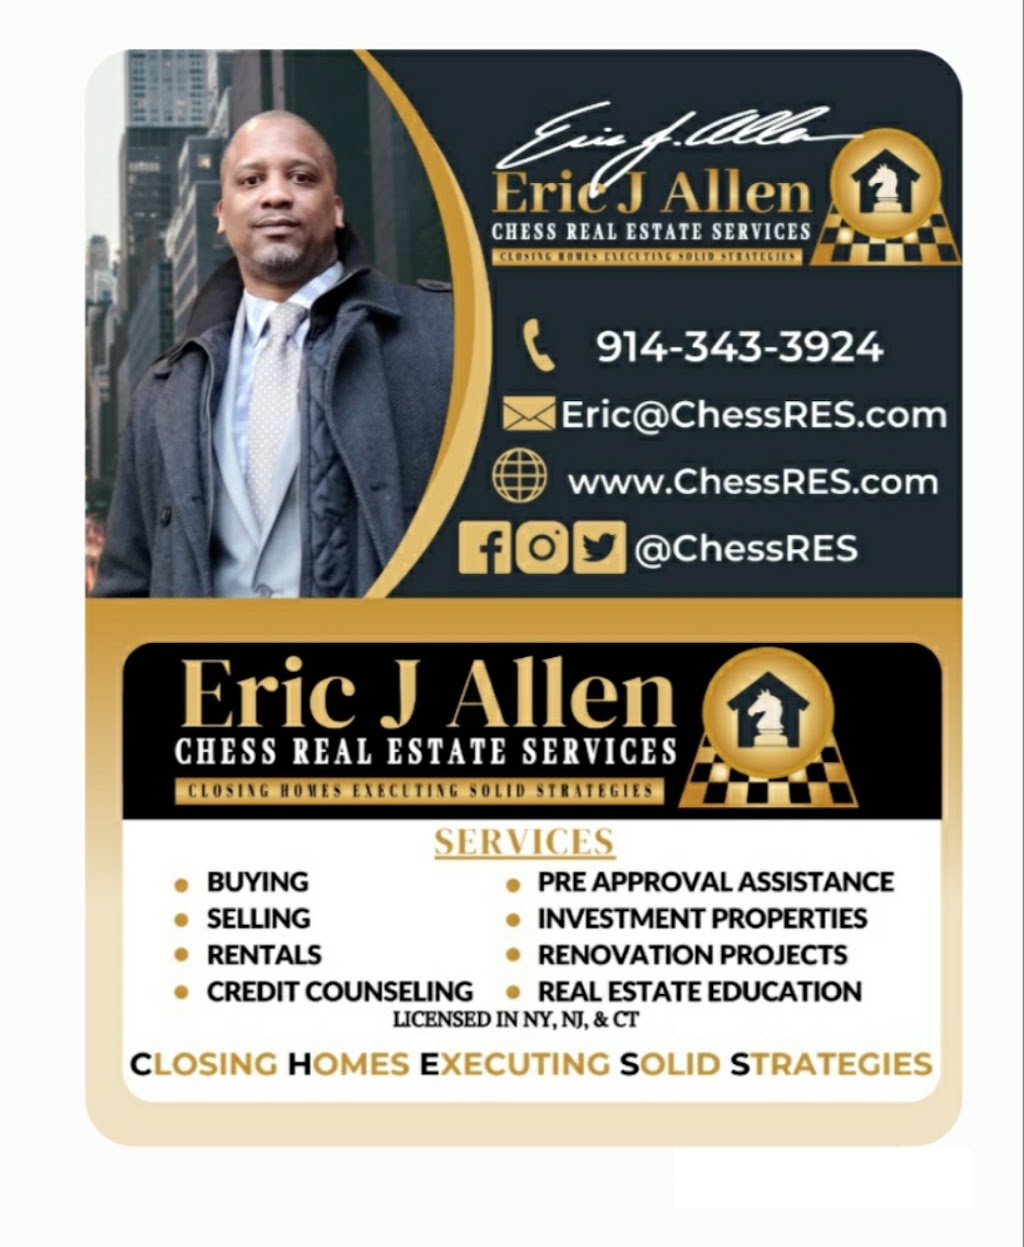 Eric J. Allen - Chess Real Estate Services LLC | 1266 E Main St Suite 700R, Stamford, CT 06902 | Phone: (914) 343-3924